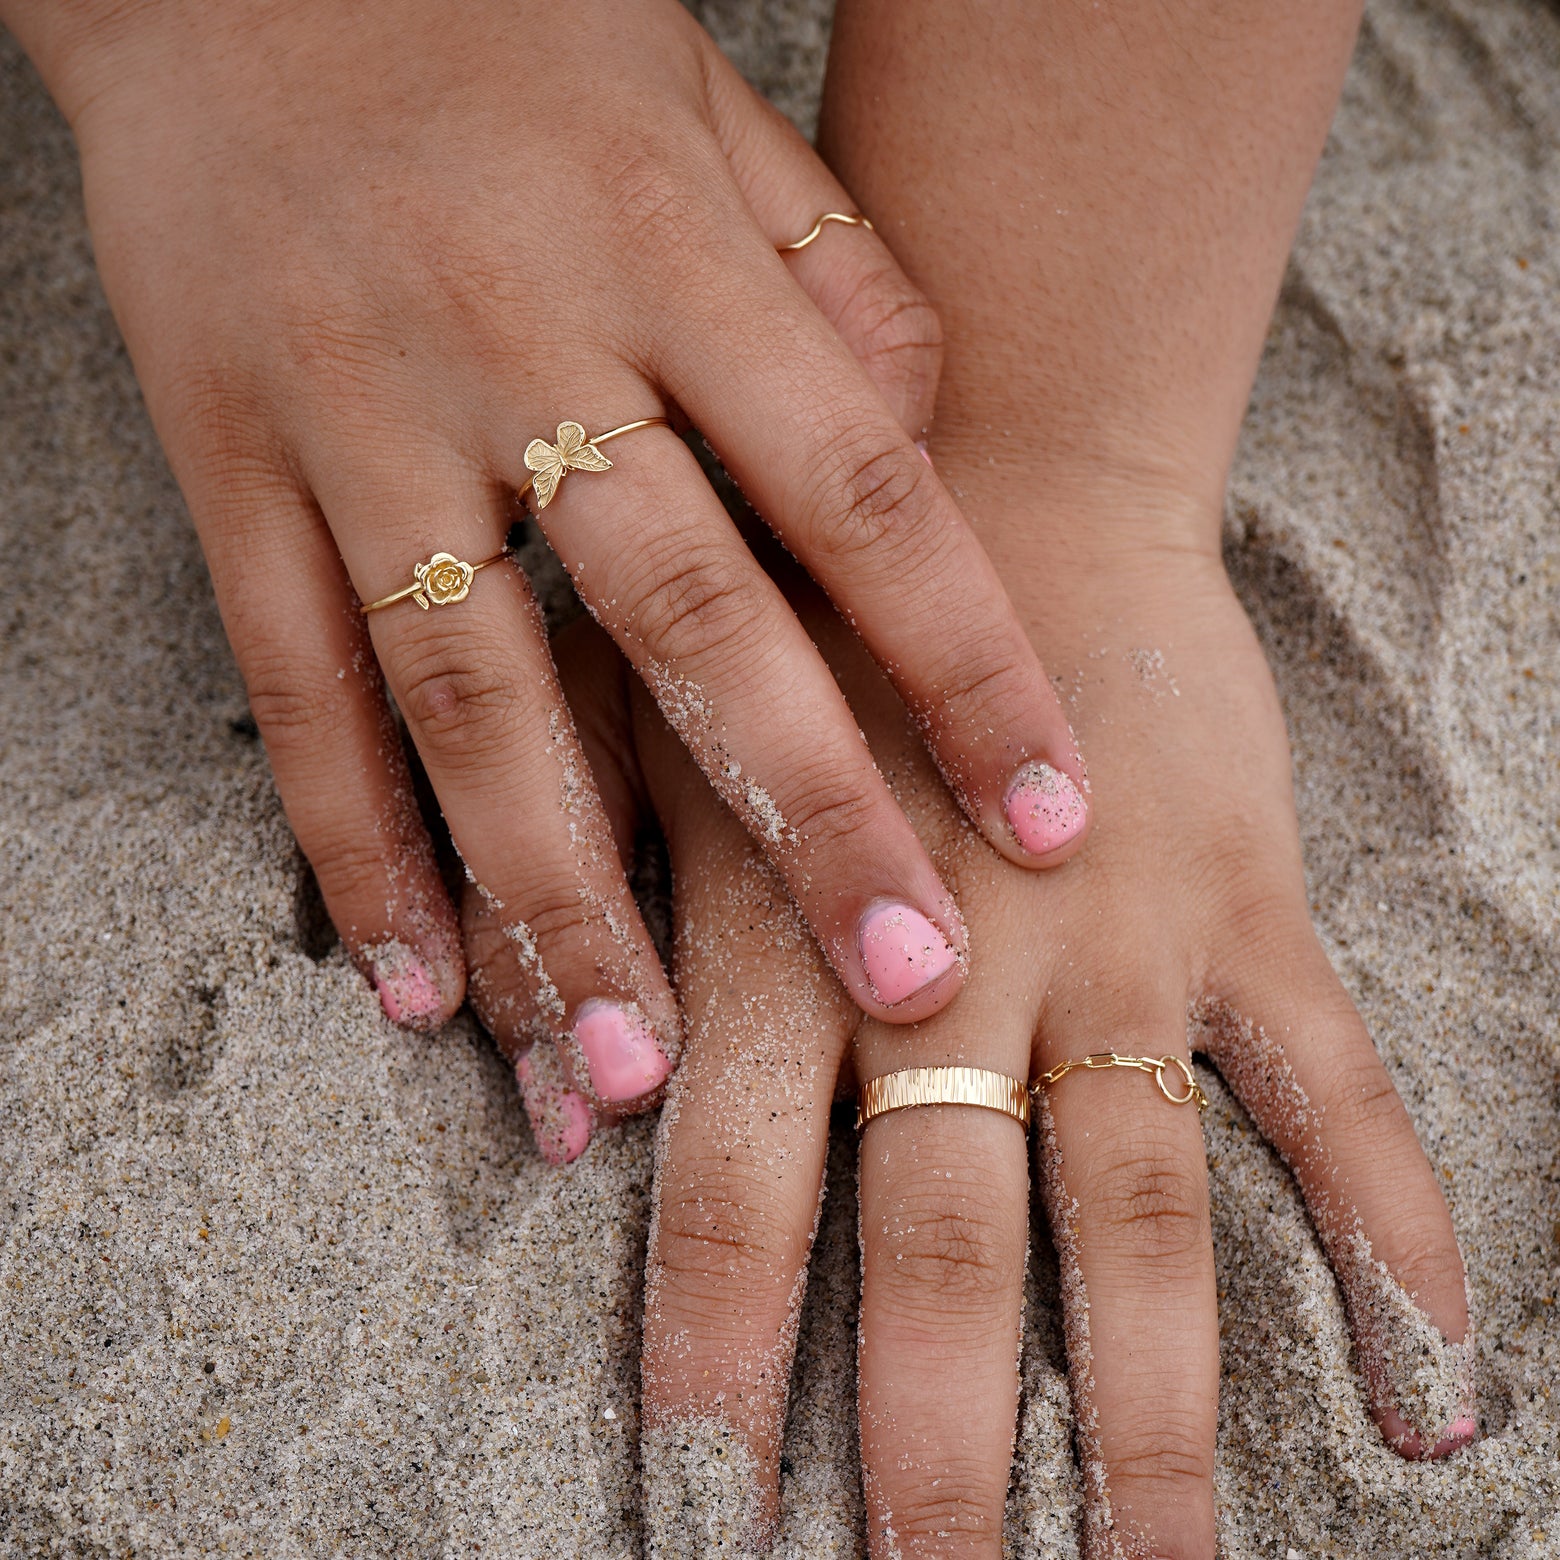 A model's hands digging into sand at the beach wearing various yellow gold Automic Gold rings